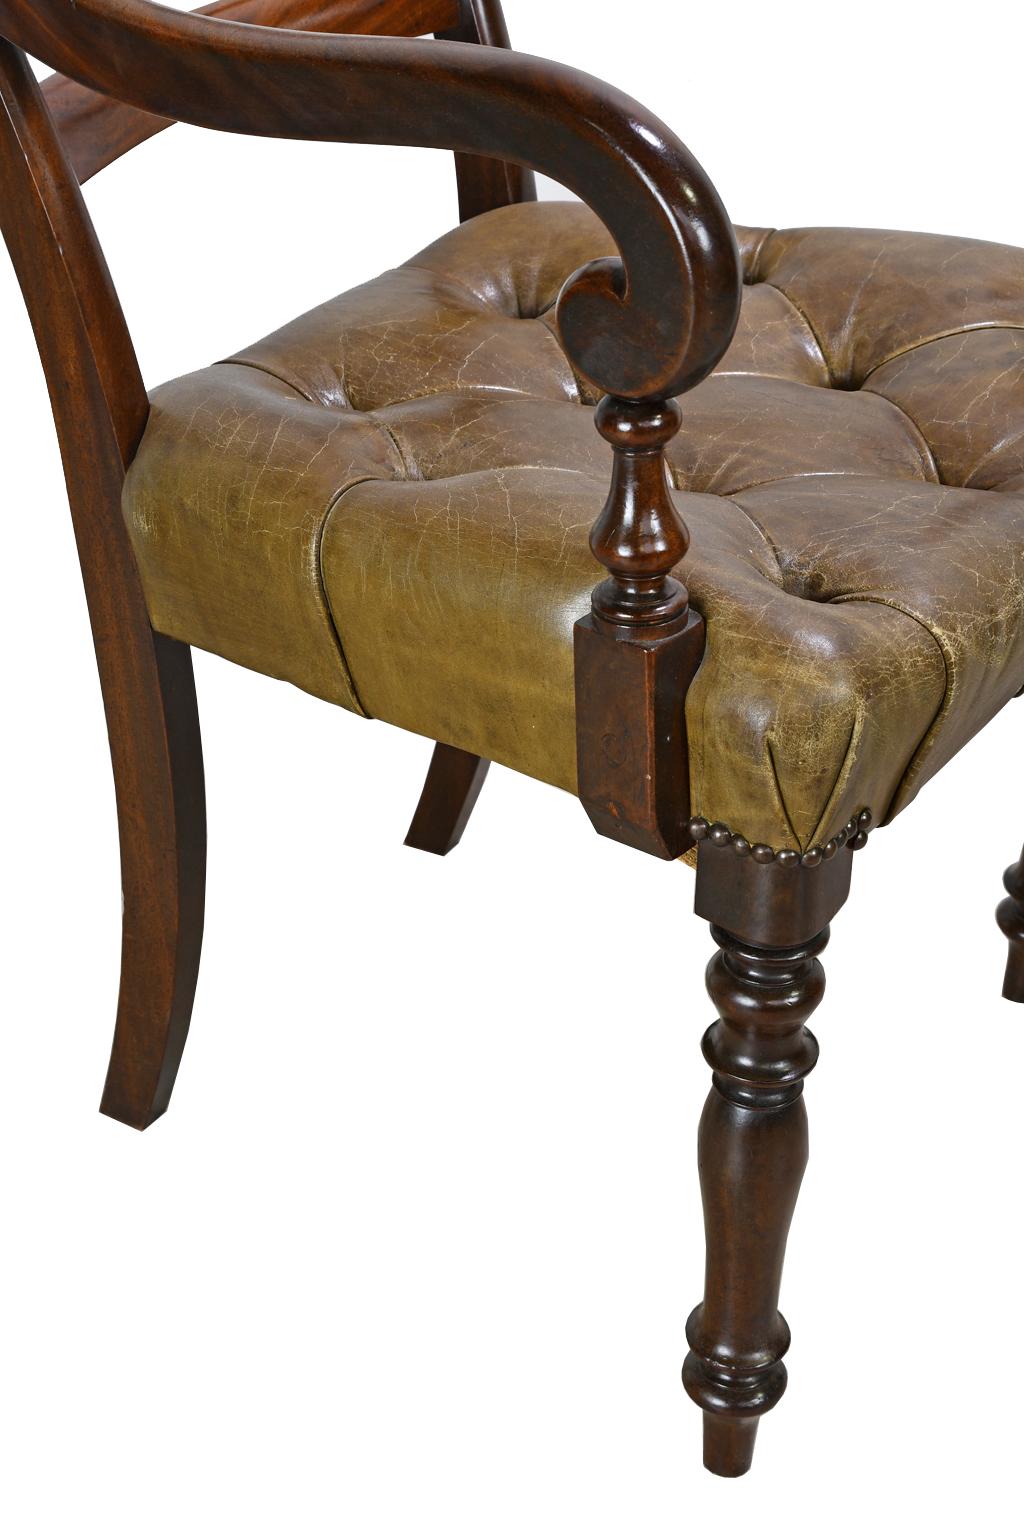 Early Victorian Mahogany Armchair with Tufted Leather Upholstery, England For Sale 3